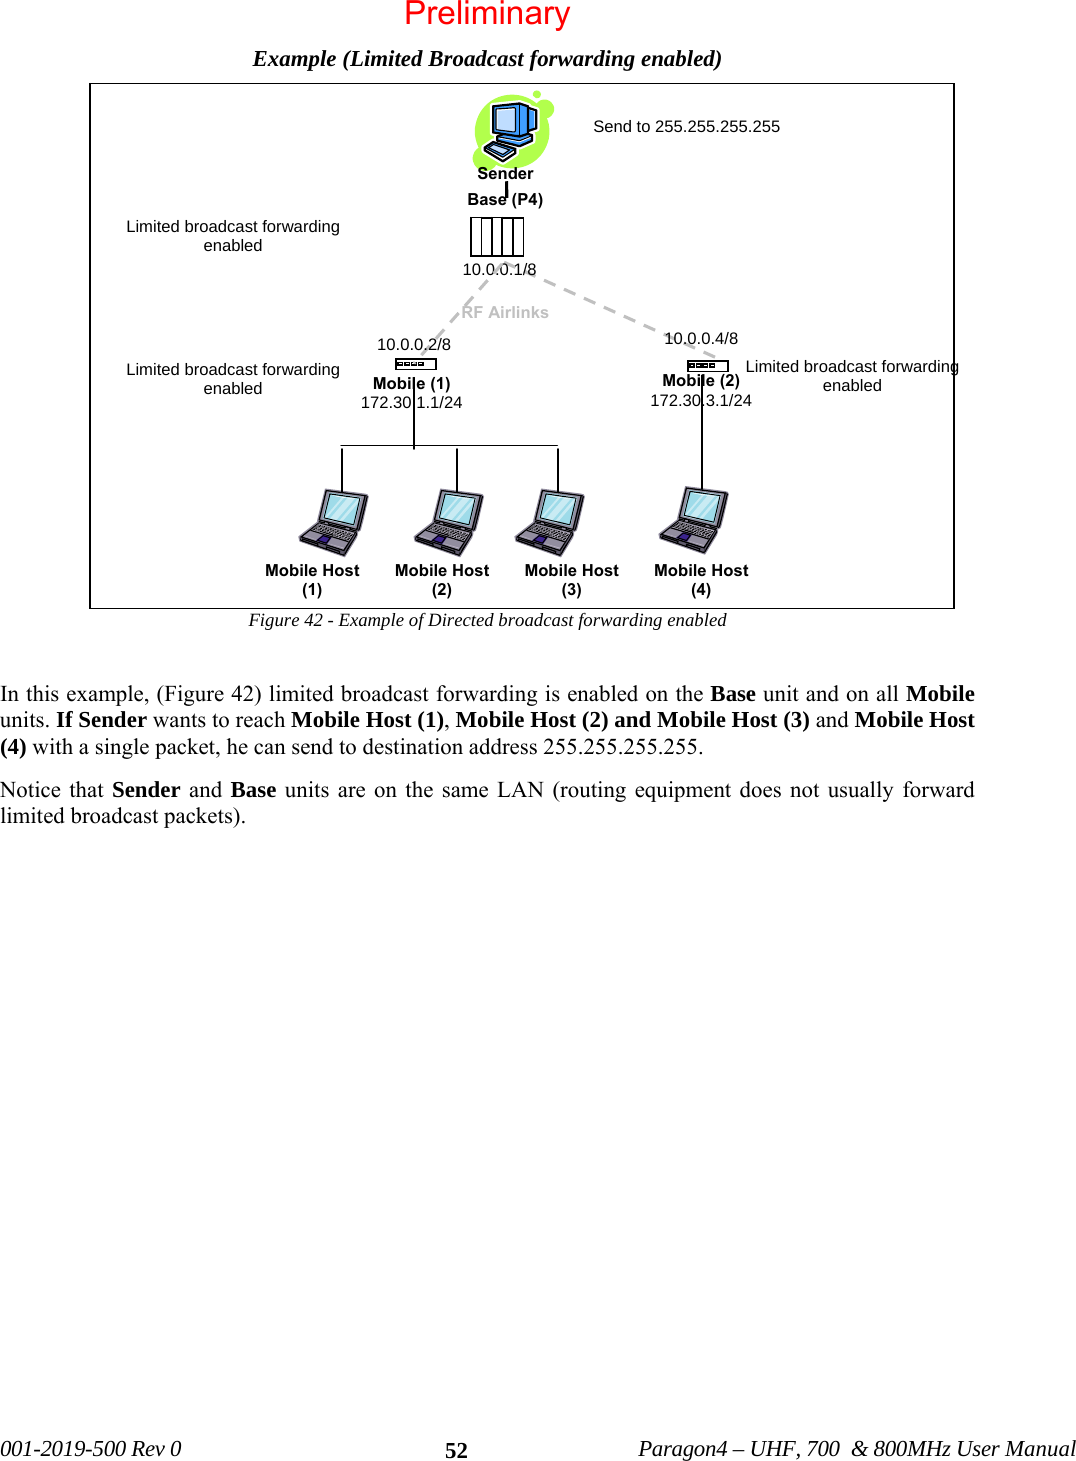   001-2019-500 Rev 0          Paragon4 – UHF, 700  &amp; 800MHz User Manual   52Example (Limited Broadcast forwarding enabled) Figure 42 - Example of Directed broadcast forwarding enabled  In this example, (Figure 42) limited broadcast forwarding is enabled on the Base unit and on all Mobile units. If Sender wants to reach Mobile Host (1), Mobile Host (2) and Mobile Host (3) and Mobile Host (4) with a single packet, he can send to destination address 255.255.255.255. Notice that Sender and Base units are on the same LAN (routing equipment does not usually forward limited broadcast packets).     Base (P4) RF AirlinksMobile Host (2) Mobile Host (3) Mobile (1) 172.30.1.1/24Mobile (2) 172.30.3.1/24 Mobile Host (1) Mobile Host (4) 10.0.0.1/8 10.0.0.4/8 Limited broadcast forwarding enabled Limited broadcast forwarding enabled Send to 255.255.255.255 Limited broadcast forwarding enabled Sender  10.0.0.2/8 Preliminary